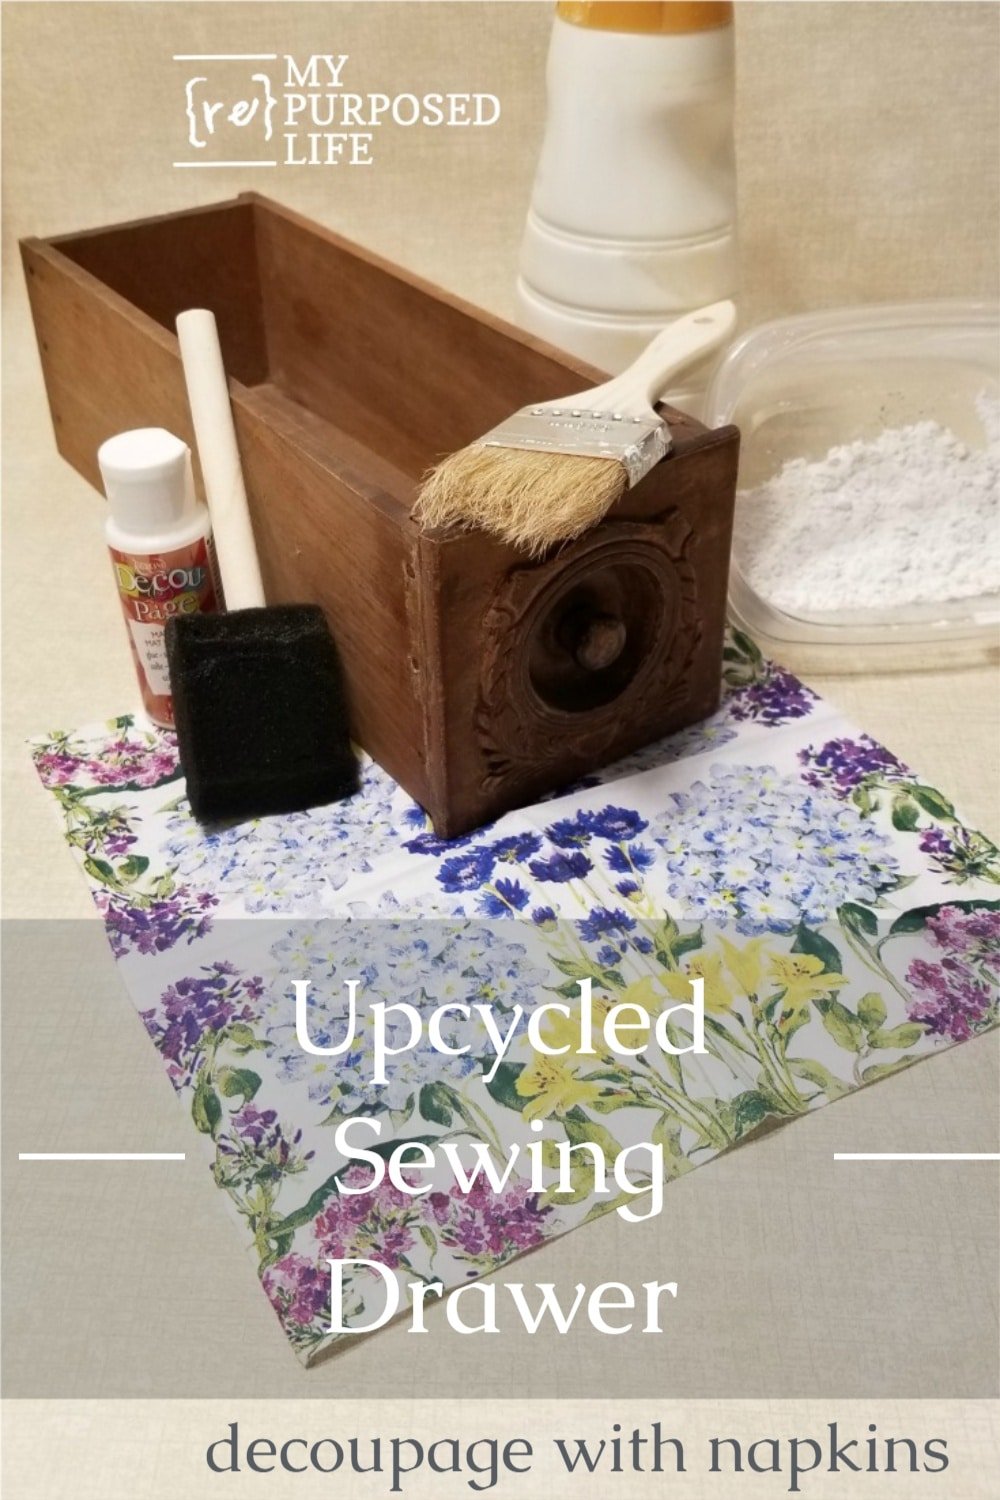 How to decoupage a vintage sewing drawer using hydrangea napkins. Step by step instructions with lots of tips to make your project quick and easy! #MyRepurposedLife #repurposed #decoupage #vintage #sewing #drawer #decoupagewithnapkins via @repurposedlife